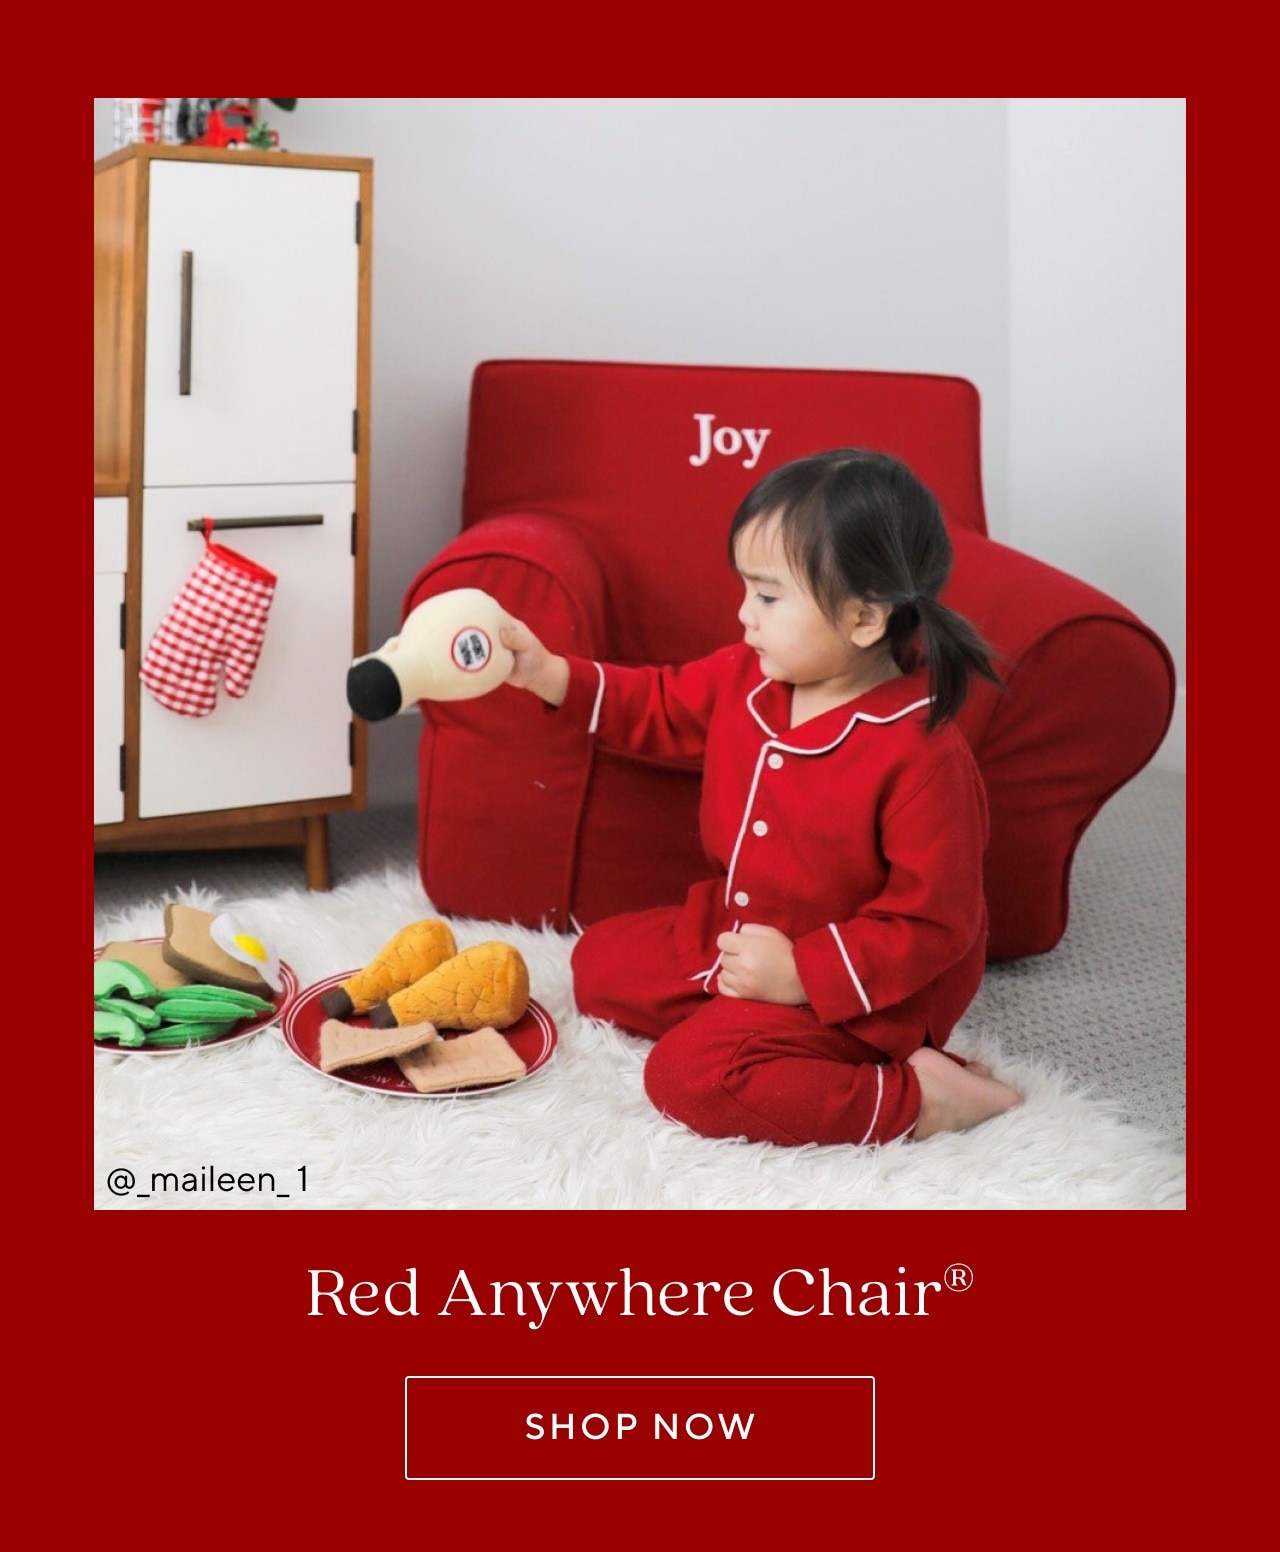 RED ANYWHERE CHAIR